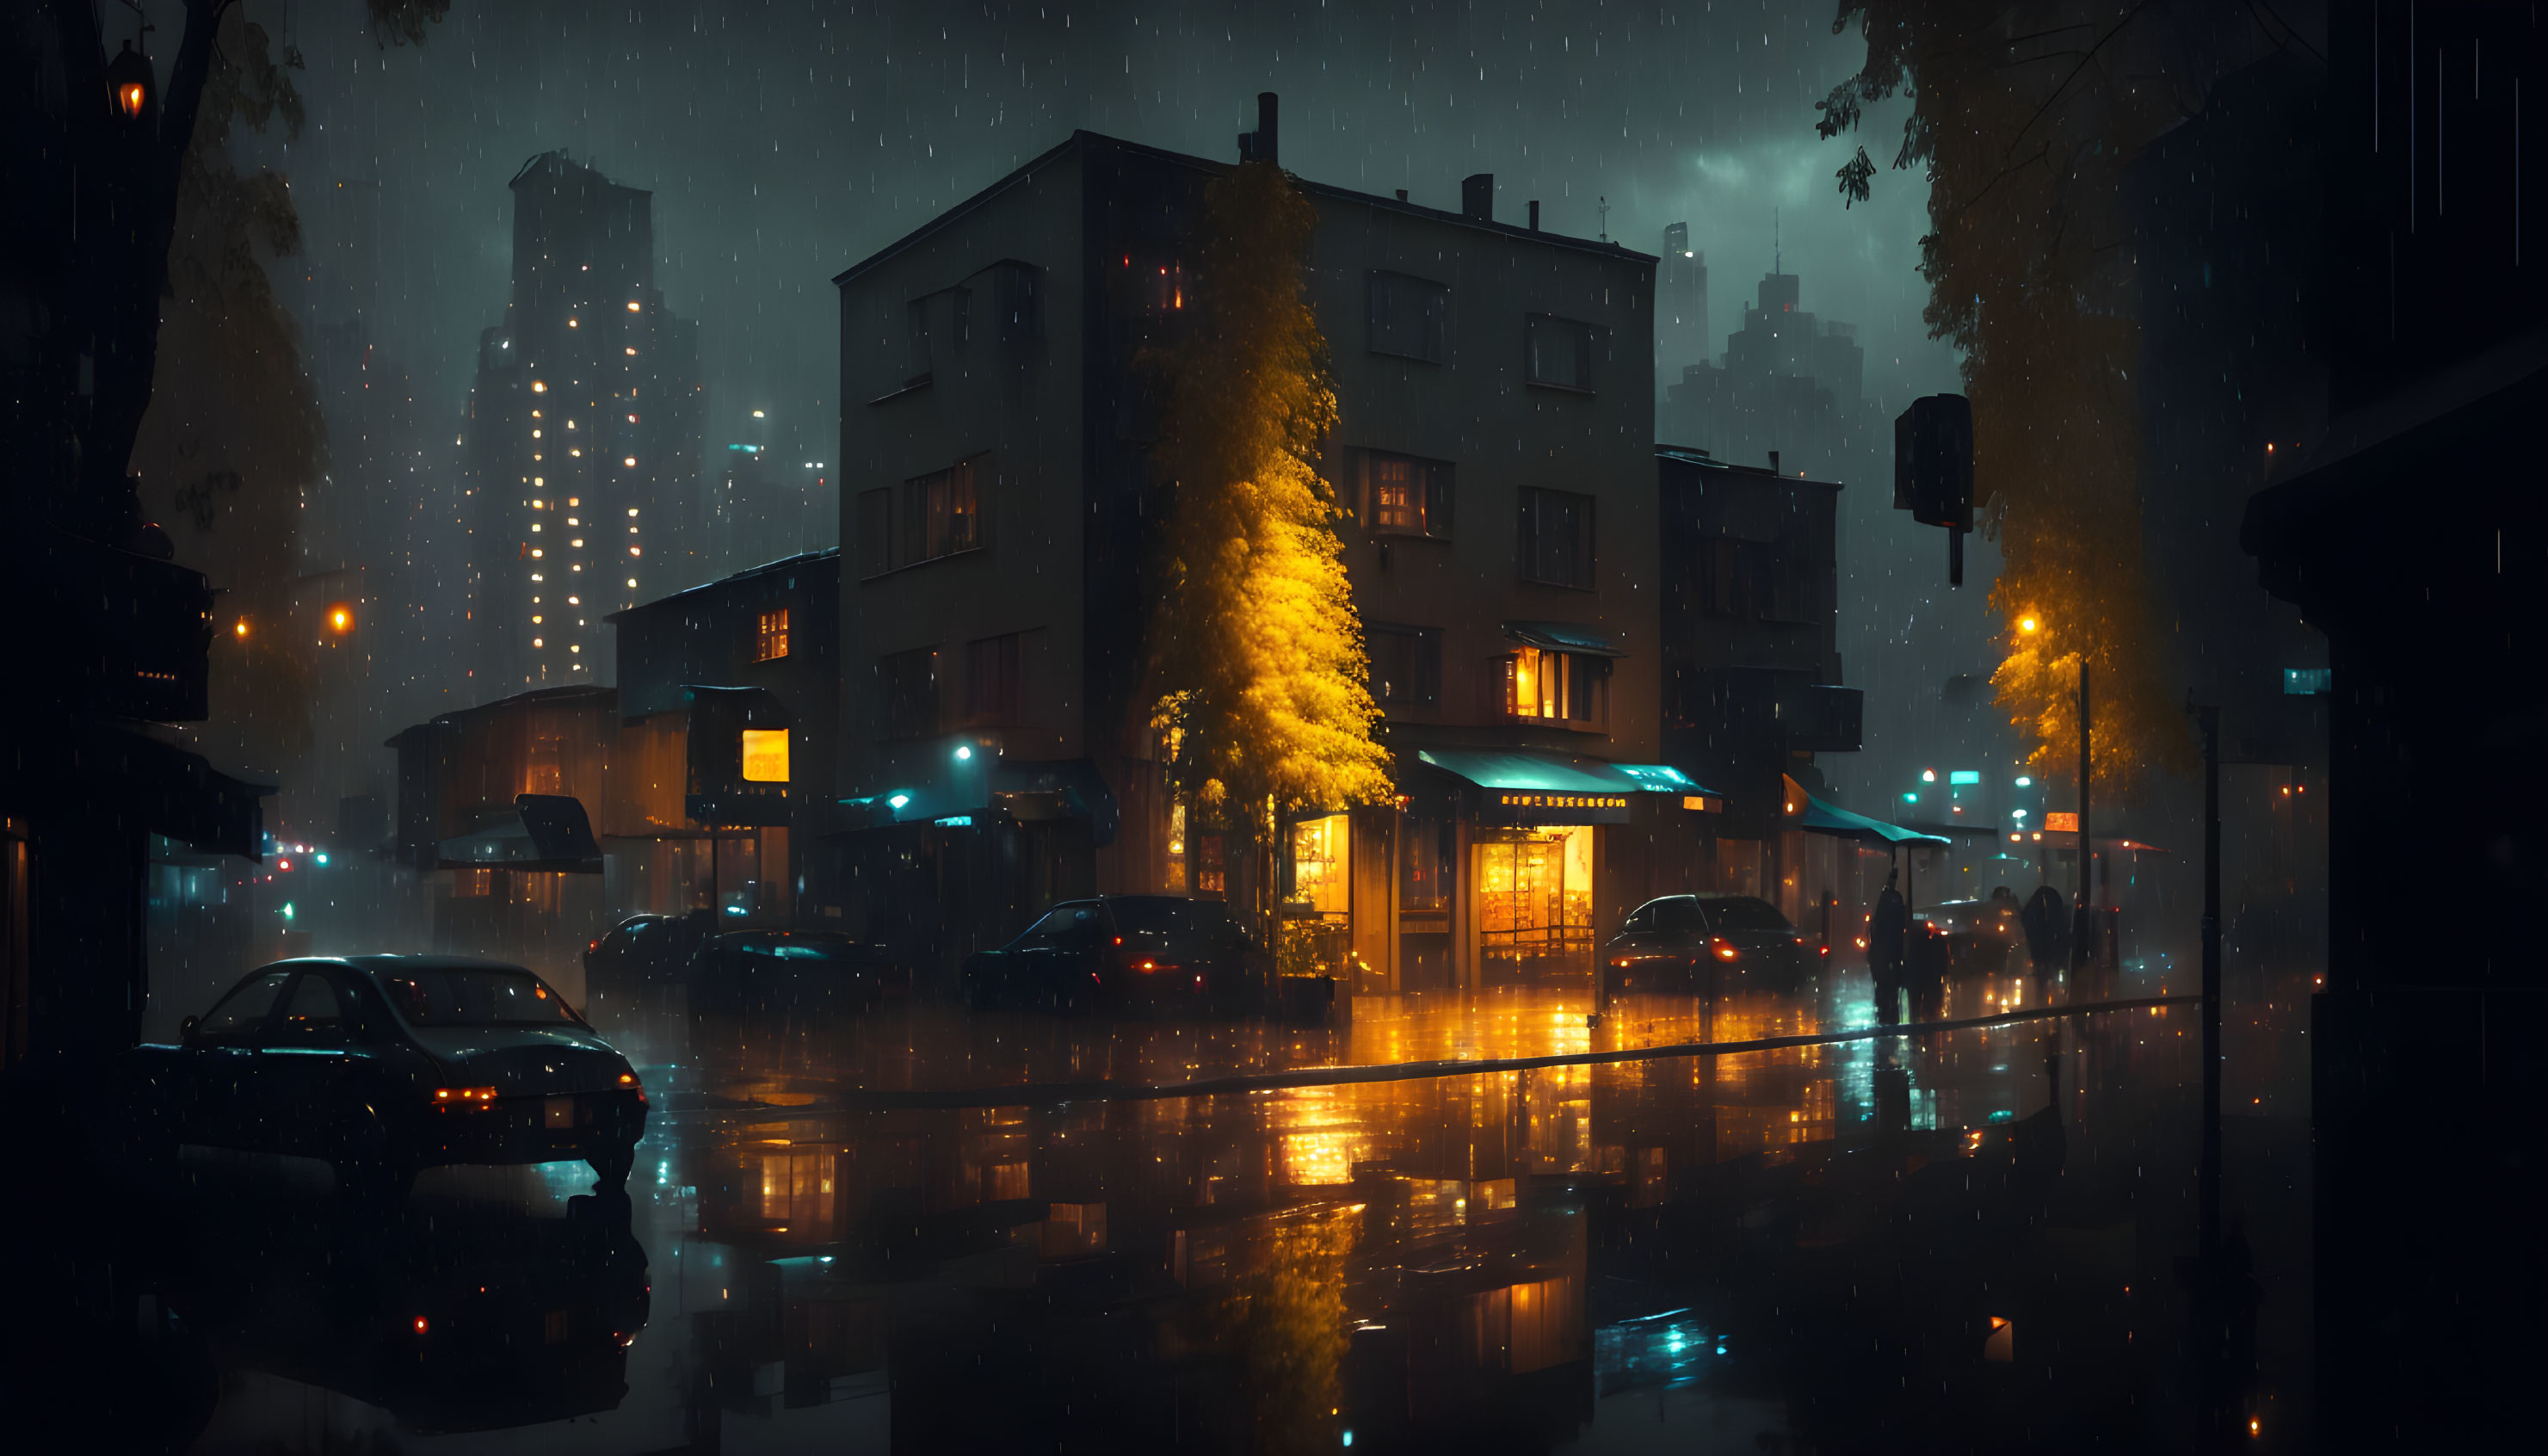 Cityscape on a Rainy Night: Wet Streets, Parked Cars, and Corner Shop under Dark